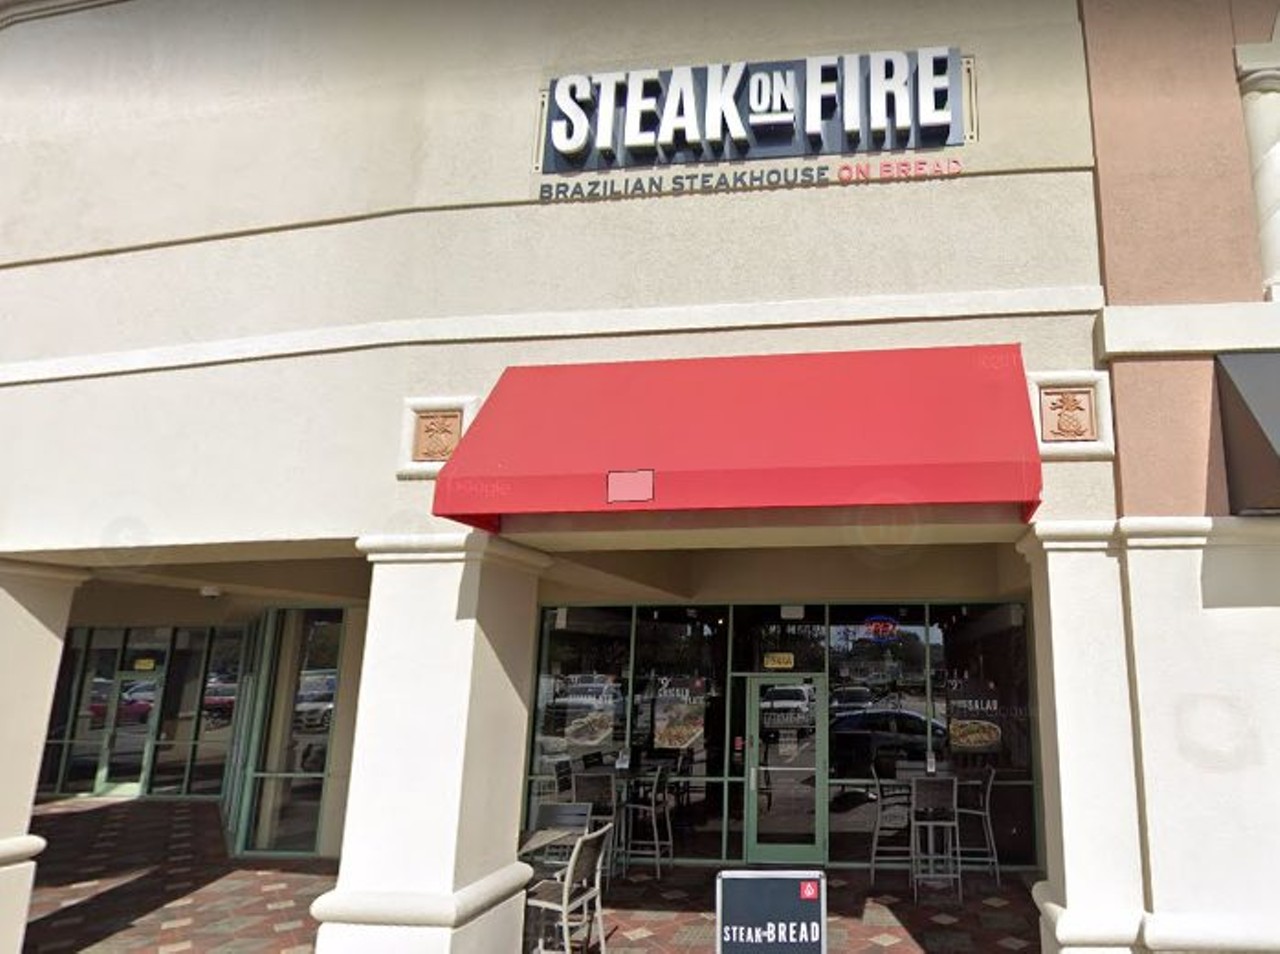 Steak on Fire 
407) 440-2323, 7541 Sand Lake Rd
Steak on Fire brings the Brazilian steakhouse concept down a few price points, offering sandwiches as well as traditional cuts. 
